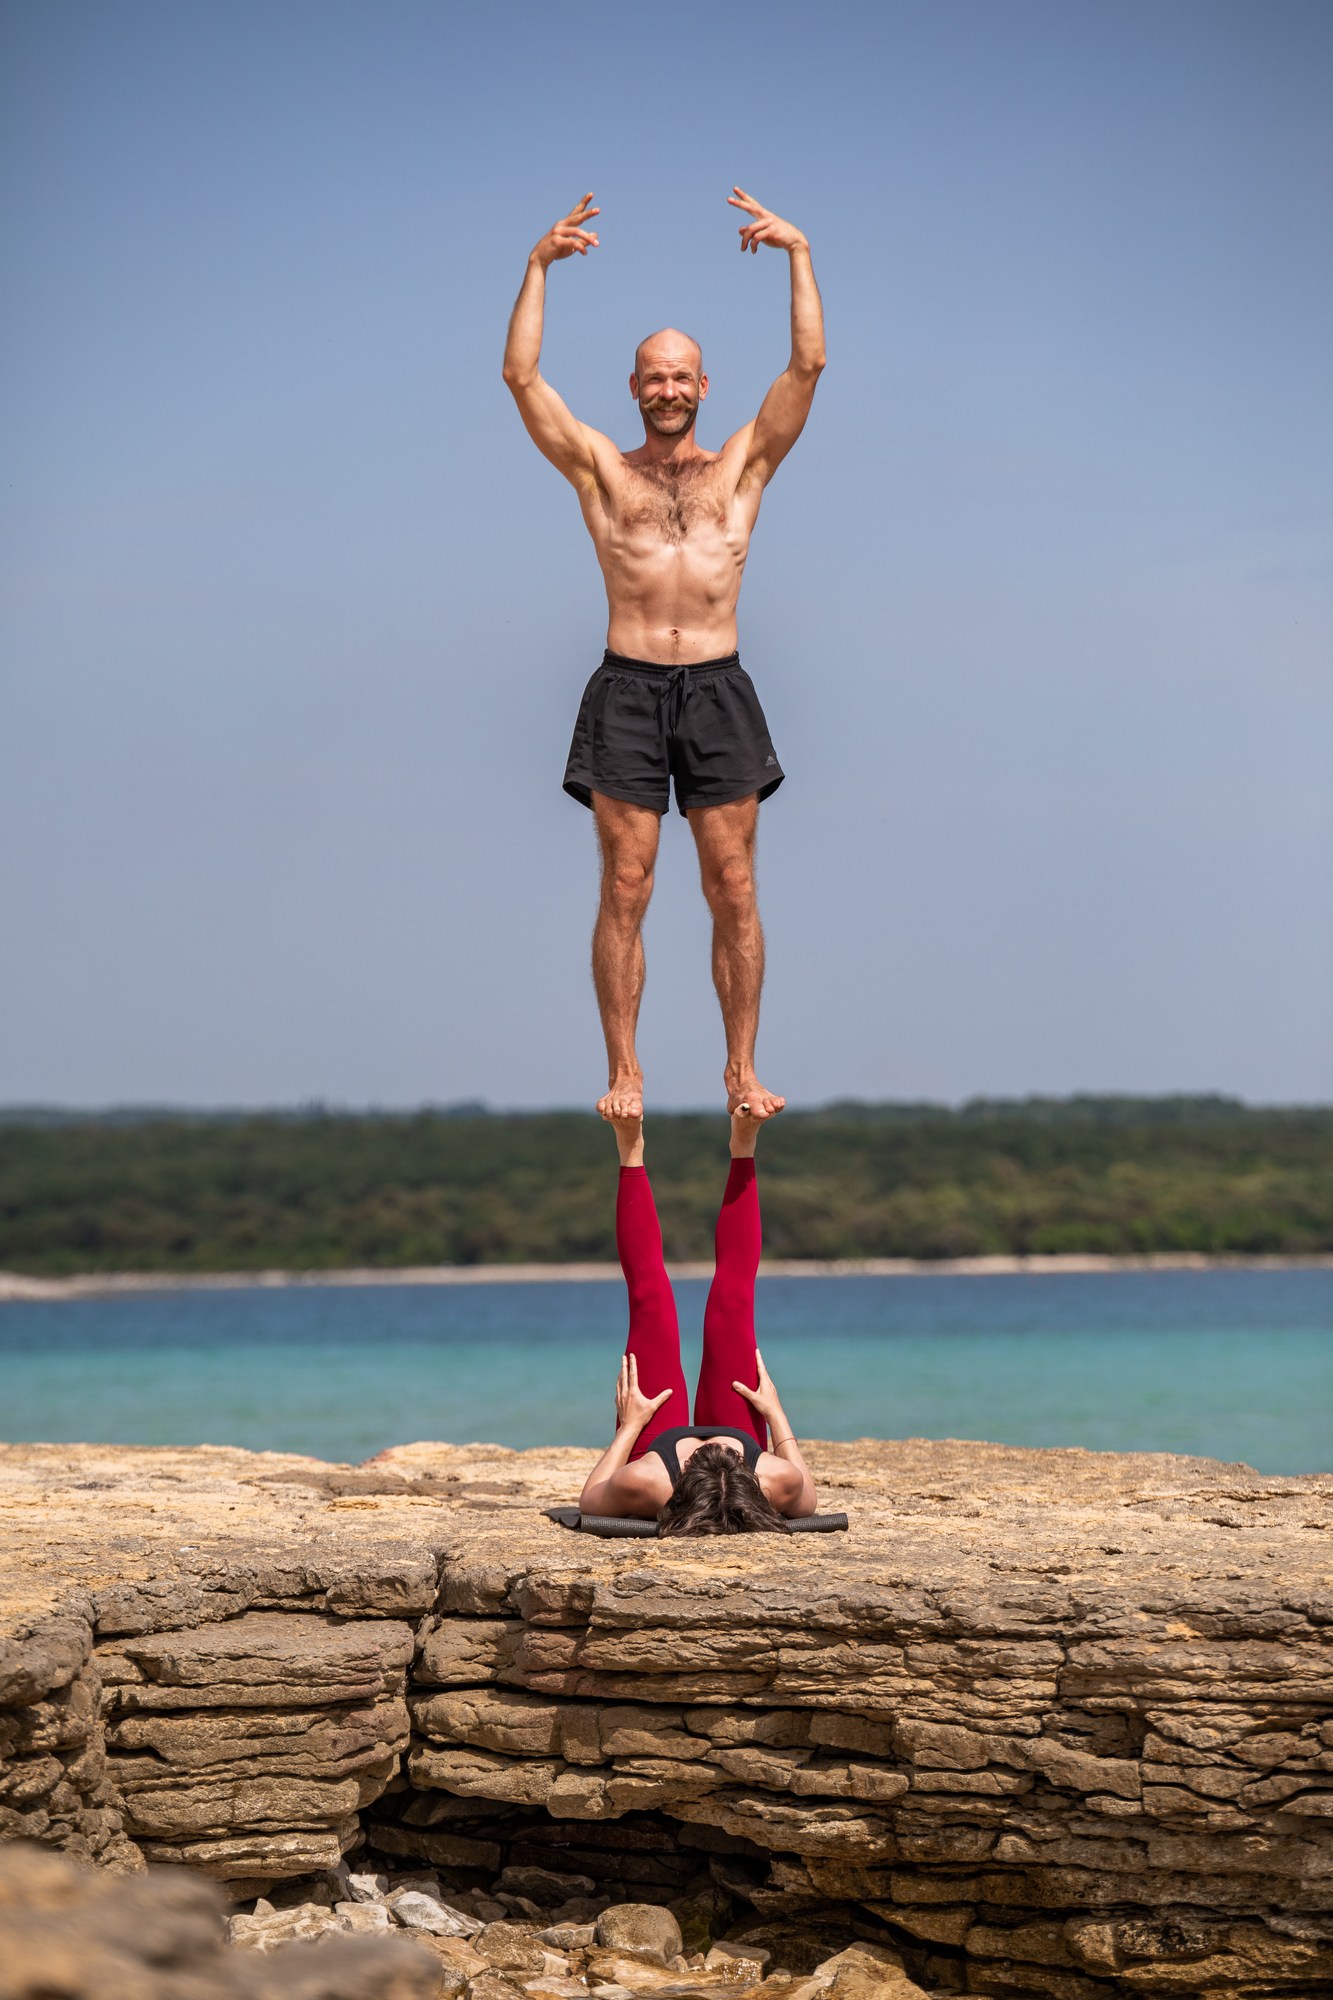 Guy standing high on someone else's feet pretending to be a balarina on the Croatian coast